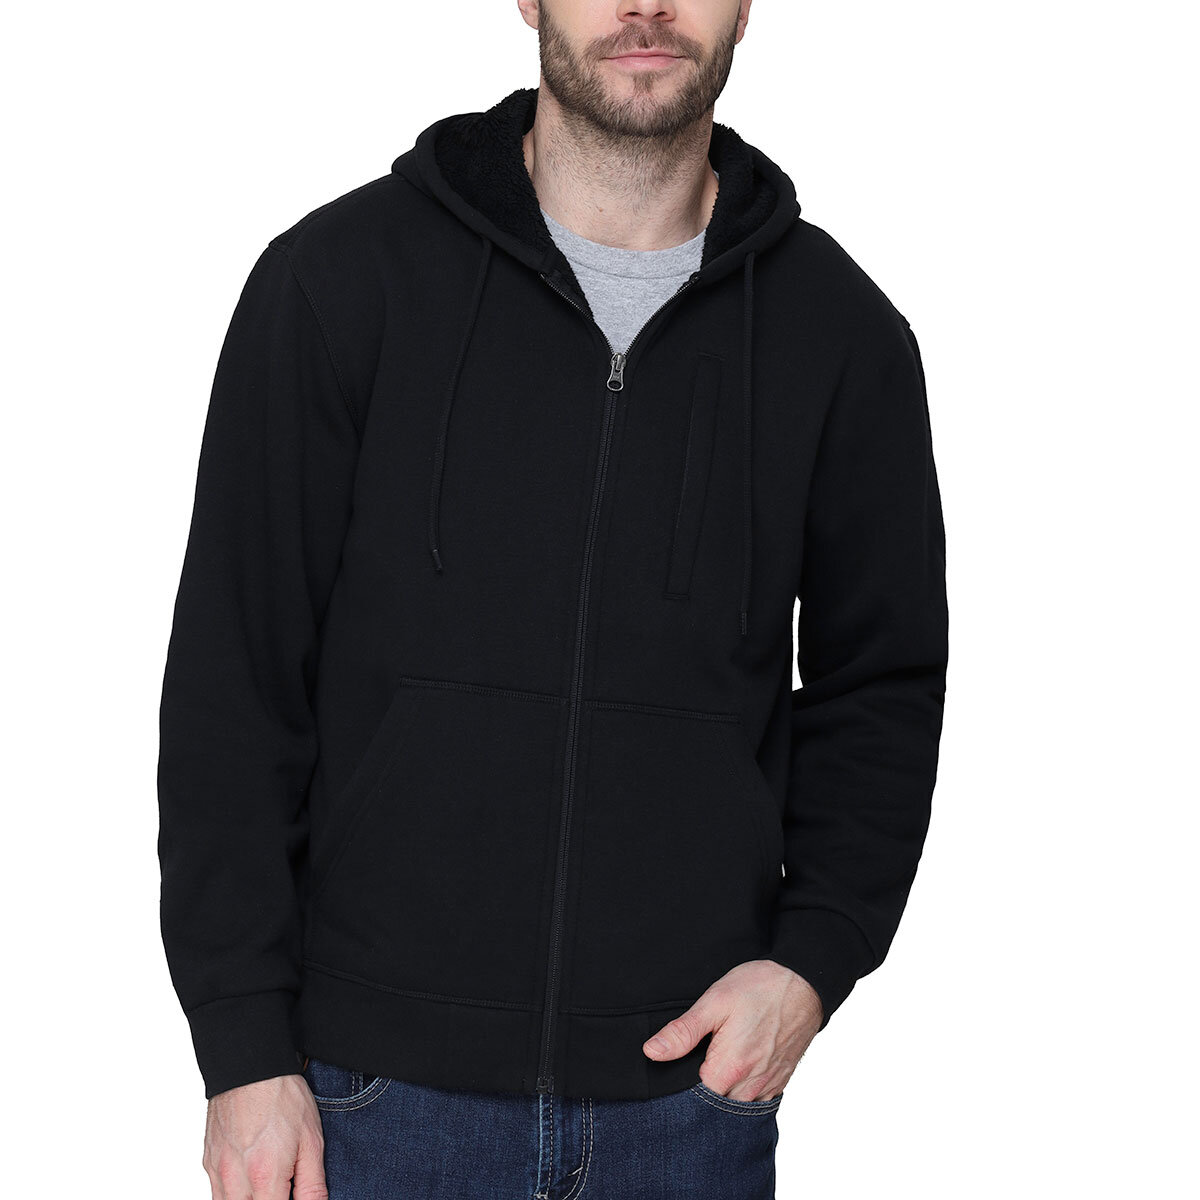 BC Clothing Fleece Lined Hoody in Black